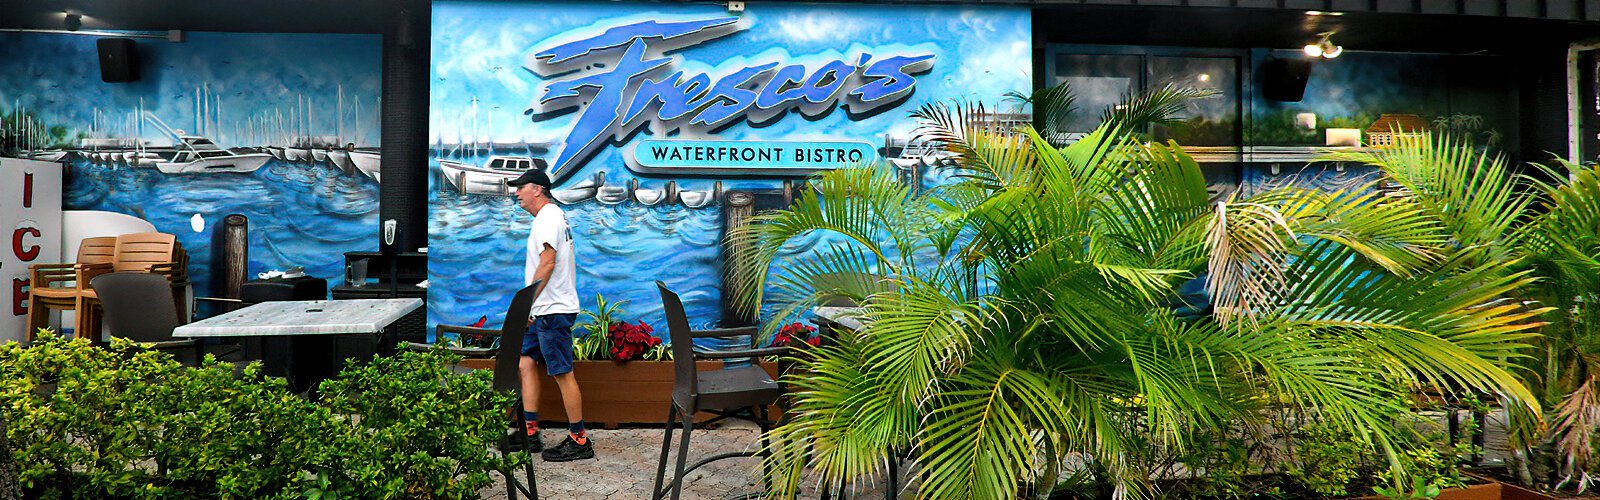  Fresco’s Waterfront Bistro is the only waterfront restaurant with a view of the Municipal Marina at the start of the St. Pete Pier.